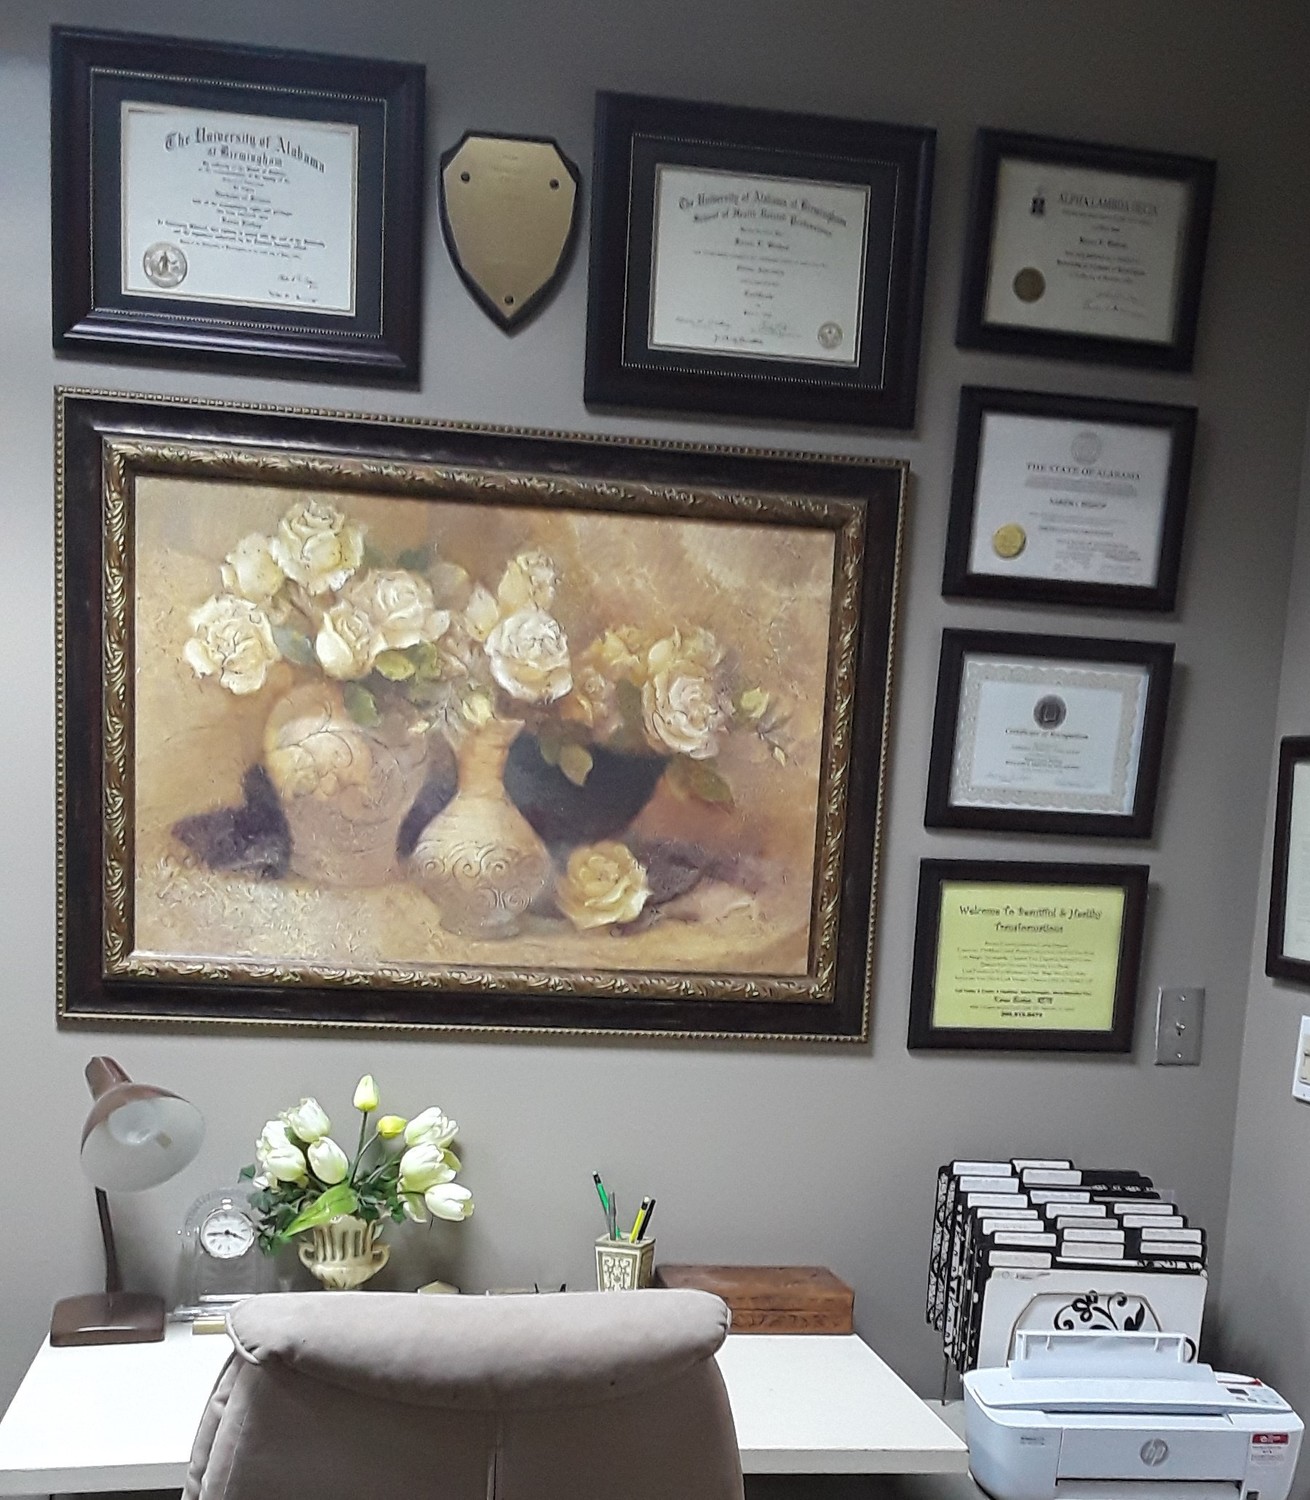 Gallery Photo of Where I create programs for patients, in my office (Birmingham/Vestavia Hills, AL). I am available in-office, by phone or in a combination of both.